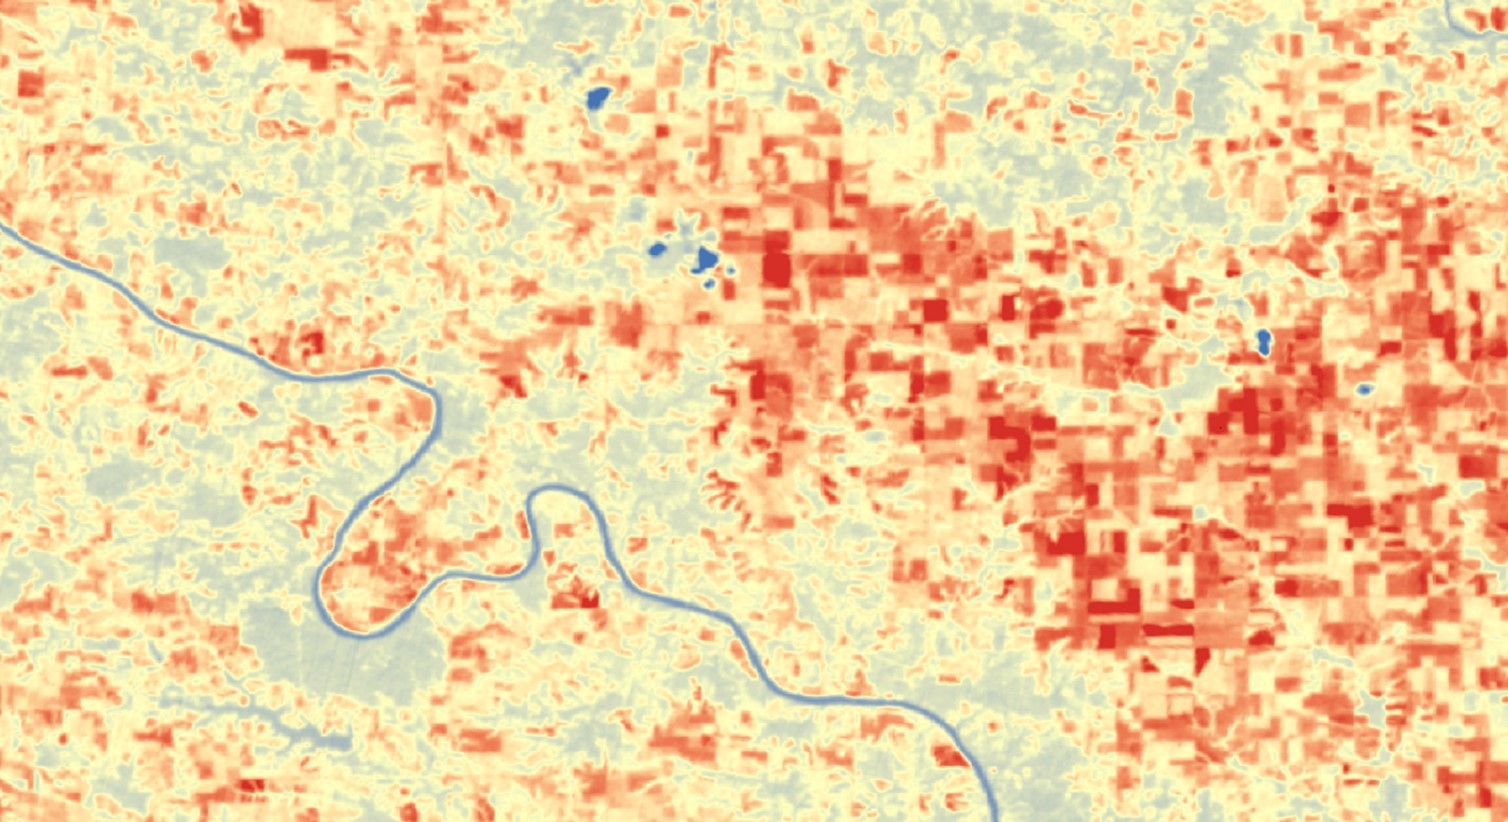 Land surface temperature (LST) derived from September 2018 Landsat 8 TIRS data, processed with bands 4,5, and 10. This image was taken over southeastern Iowa around the Des Moines River. The darkest red values indicate higher temperatures around 40˚C while the darkest blue values indicate the lower temperatures around 24 ˚C. Higher temperatures indicate greater amounts of plant stress.